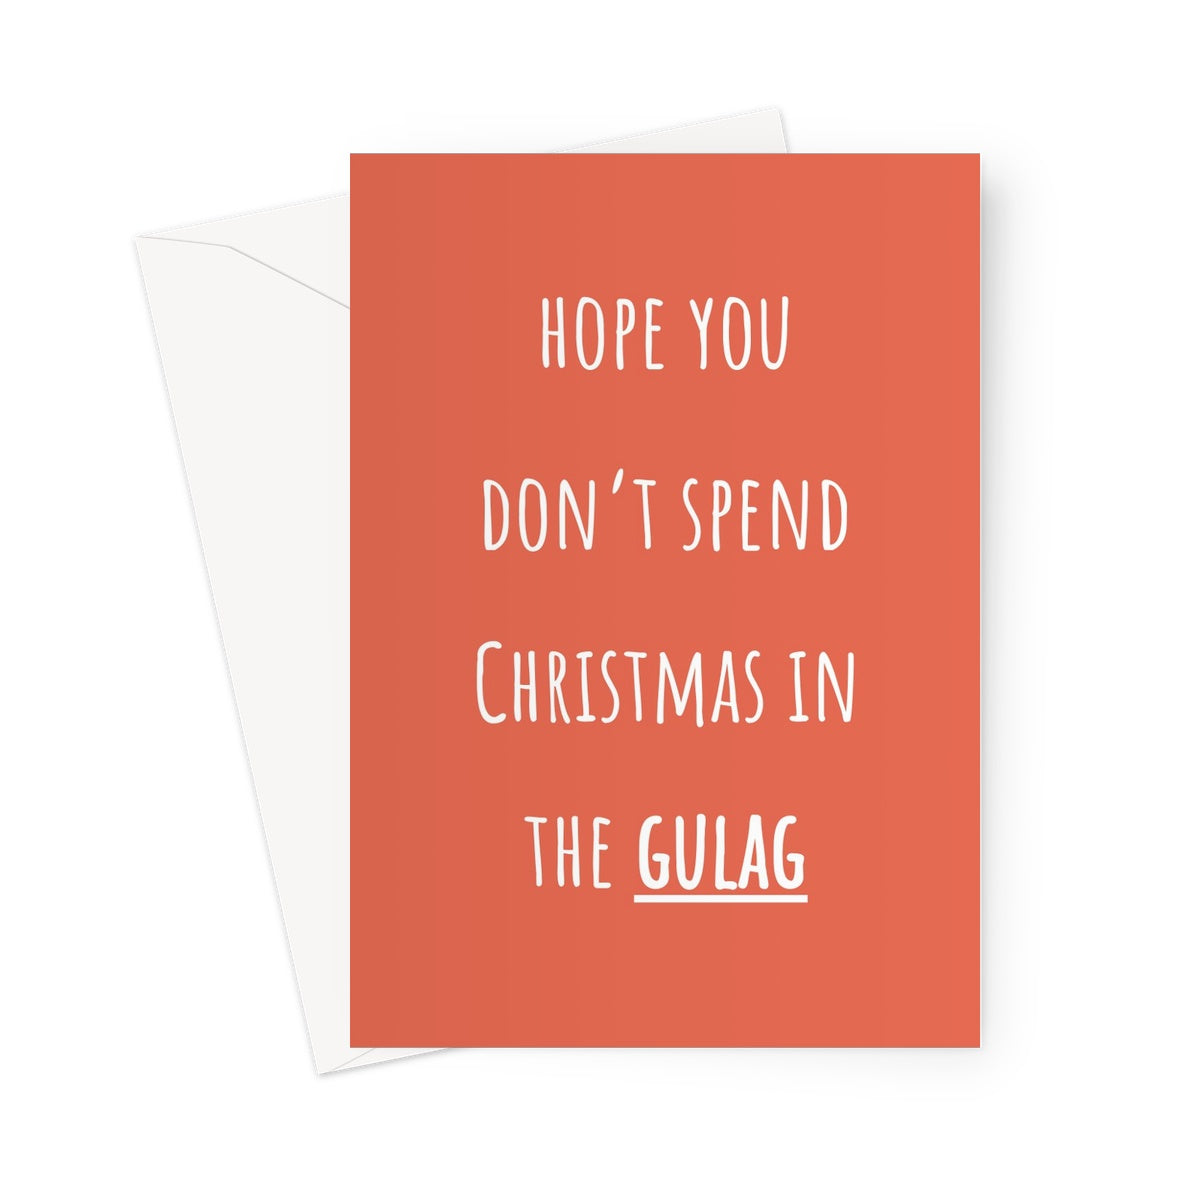 Hope You Don't Spend Christmas in the Gulag Funny Meme COD Video Game Gamer Prison Boyfriend Girlfriend Battle Royale Greeting Card